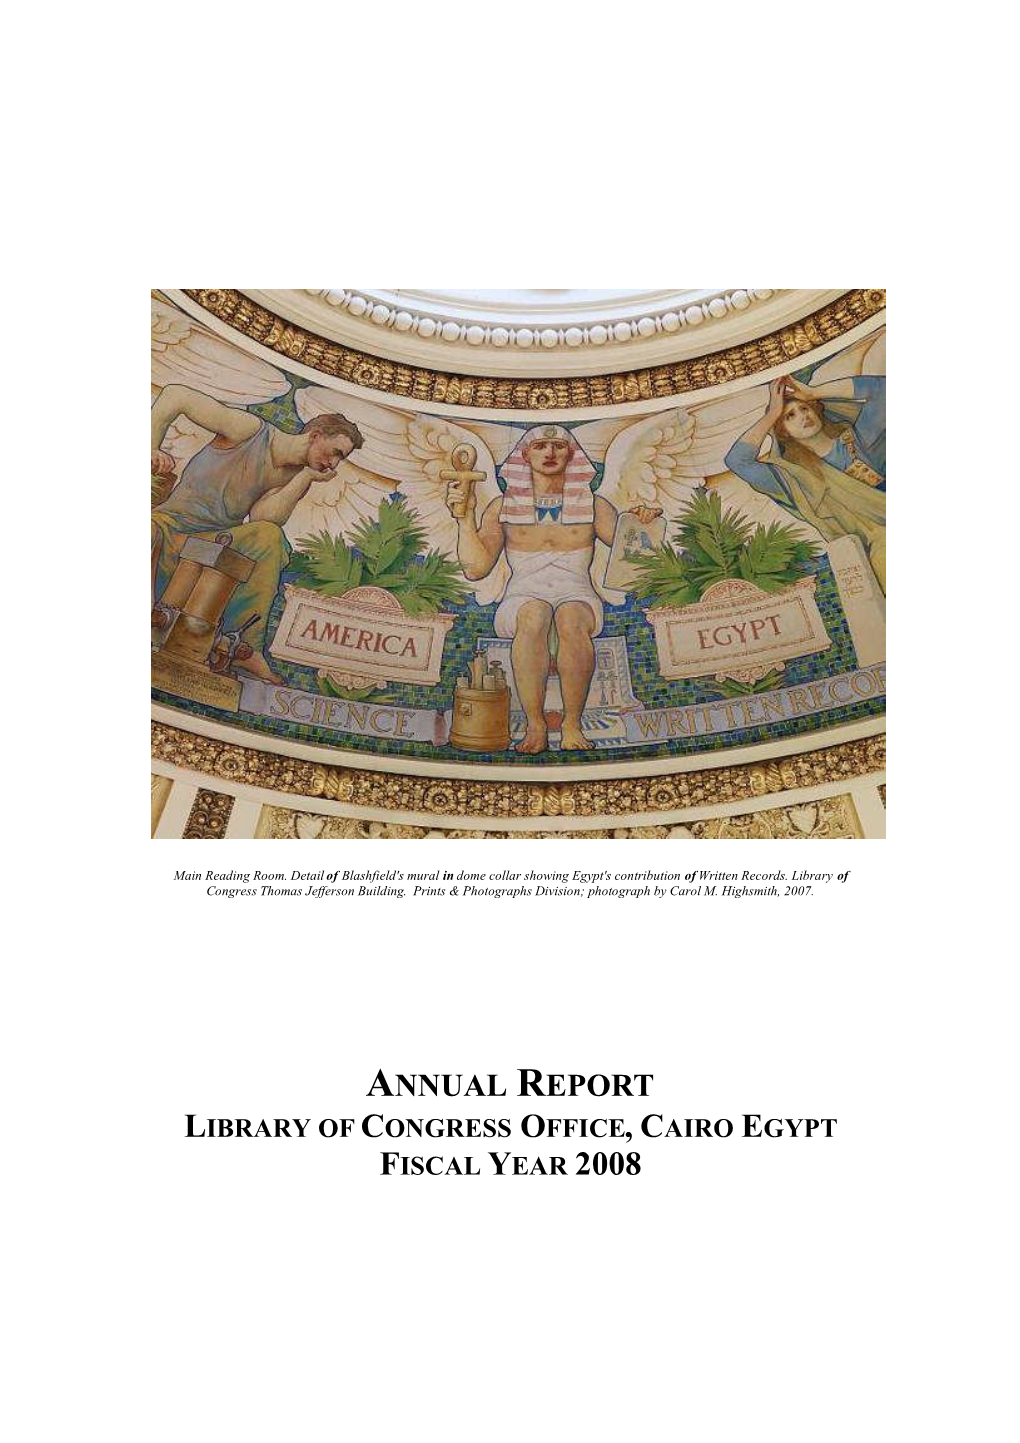 Cairo Office Annual Report Fiscal Year 2008